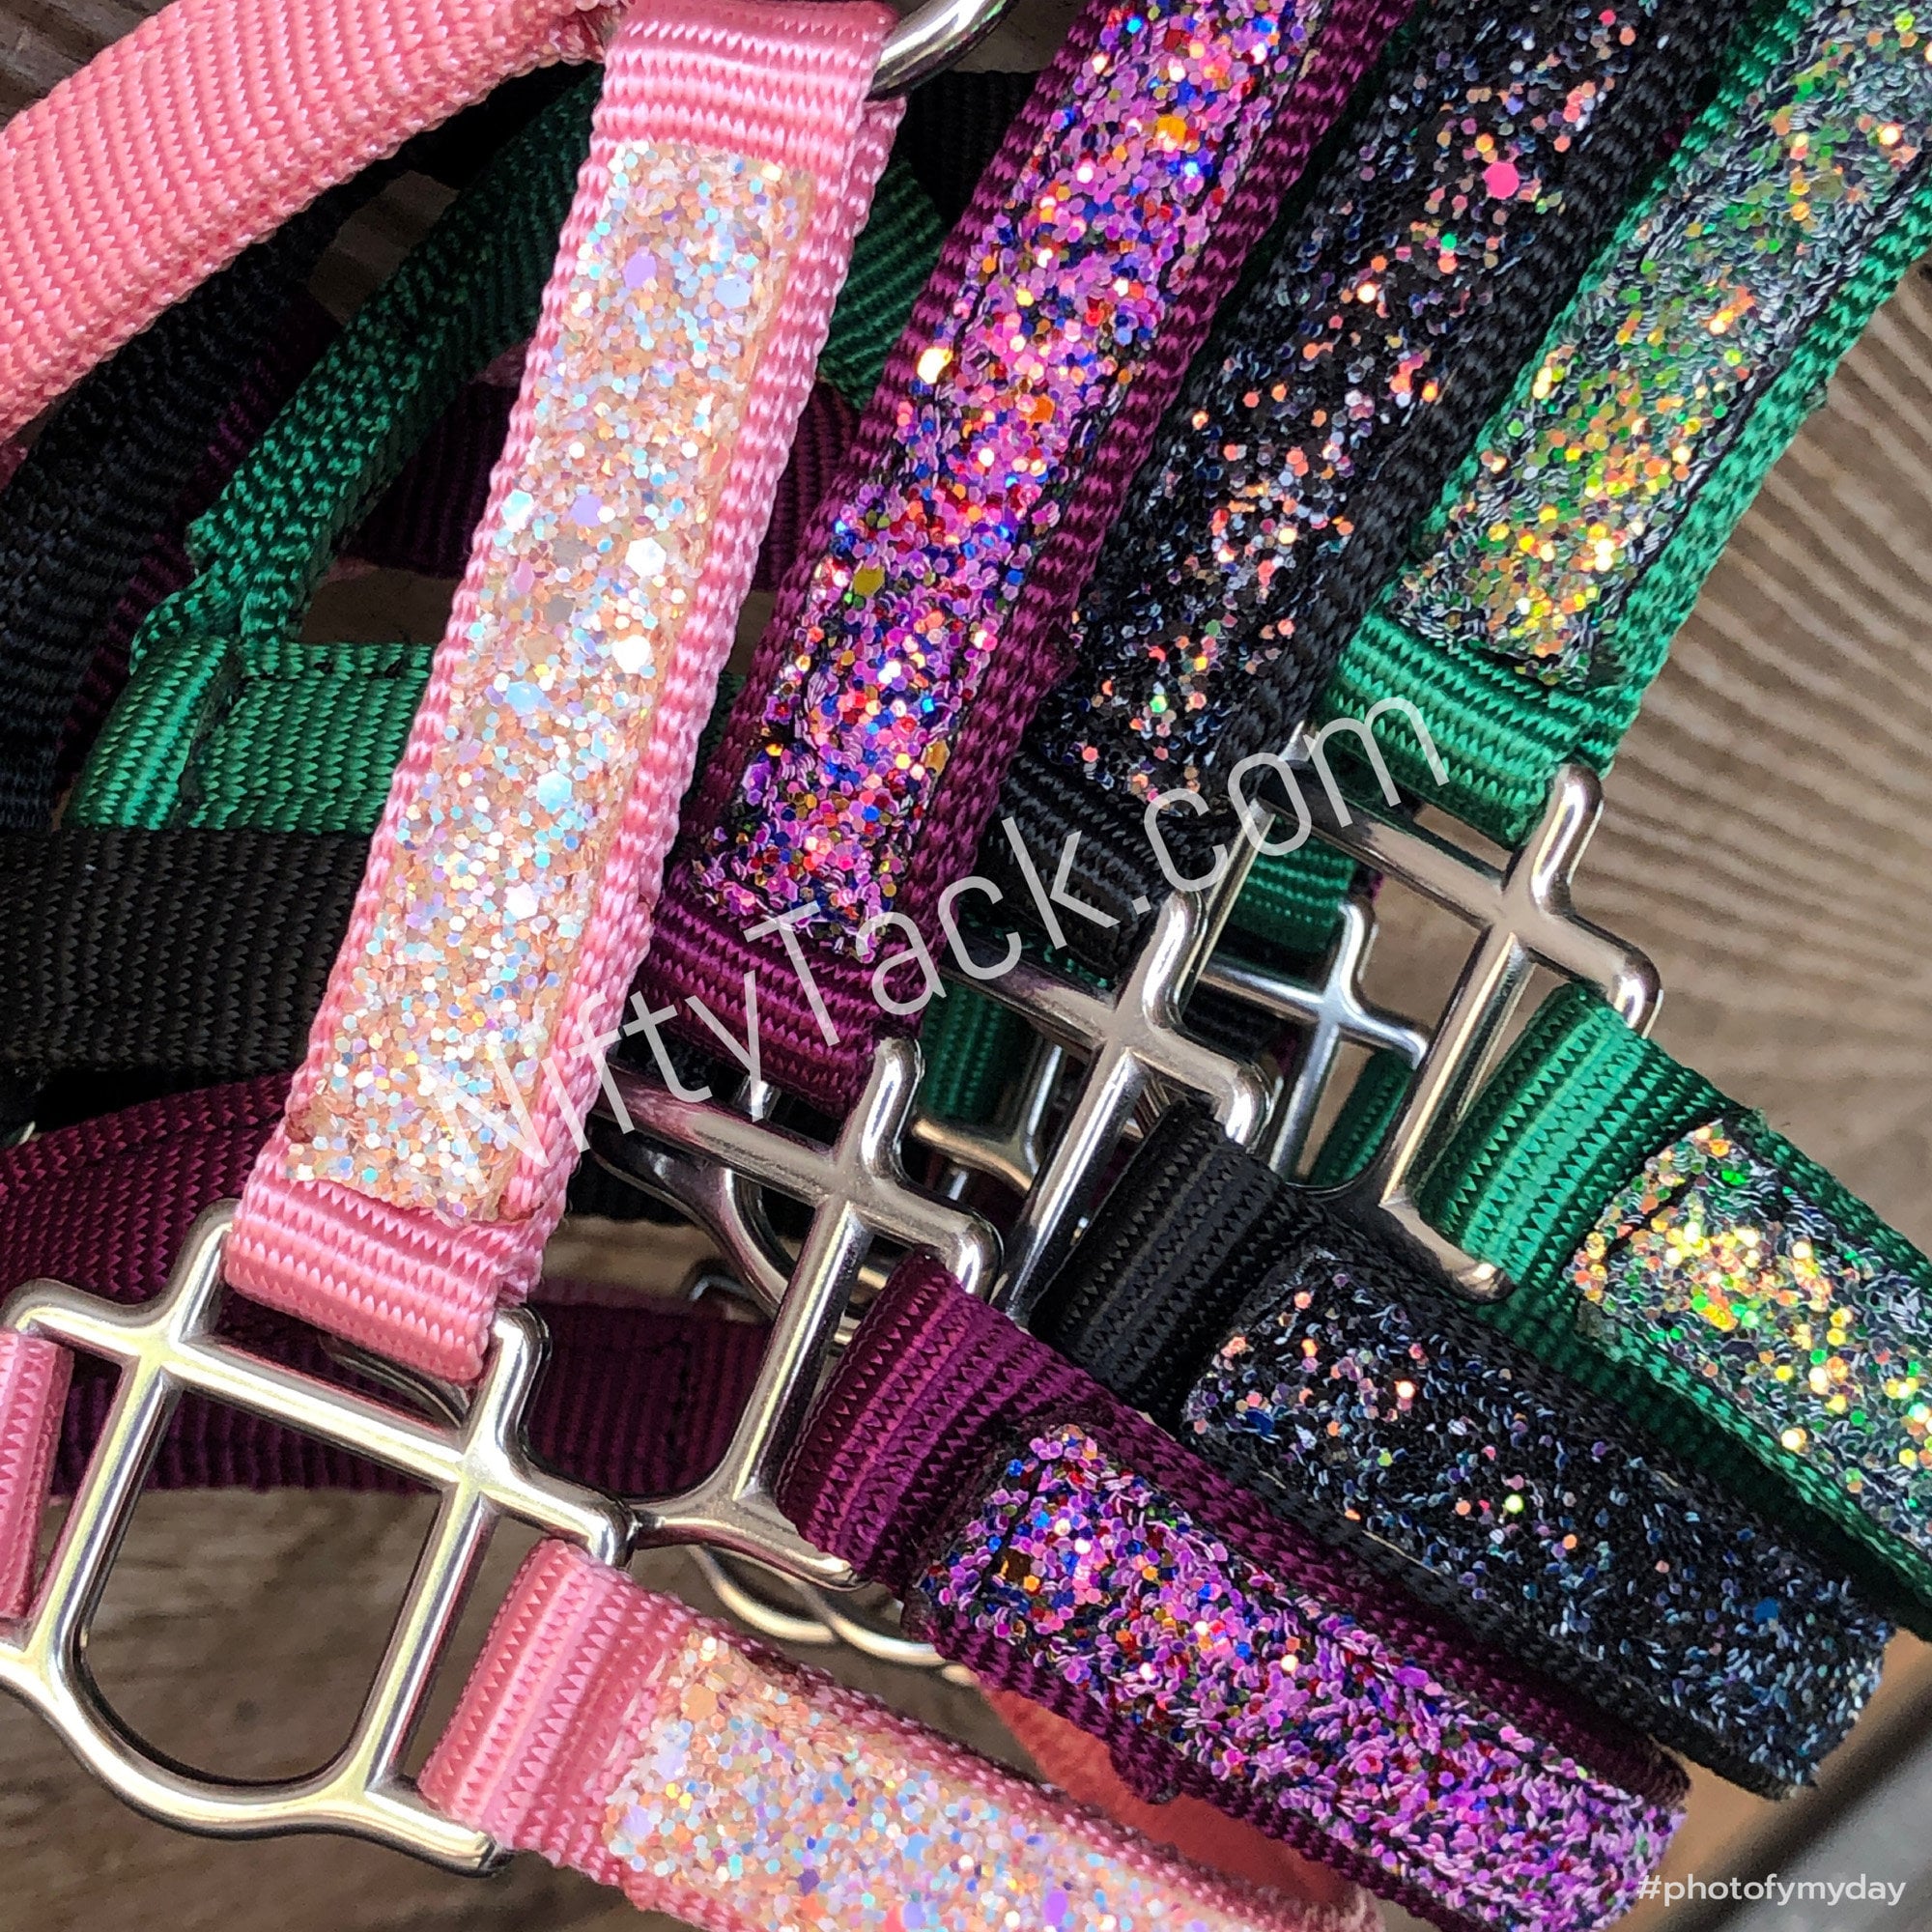 Luxury leather halter with bling